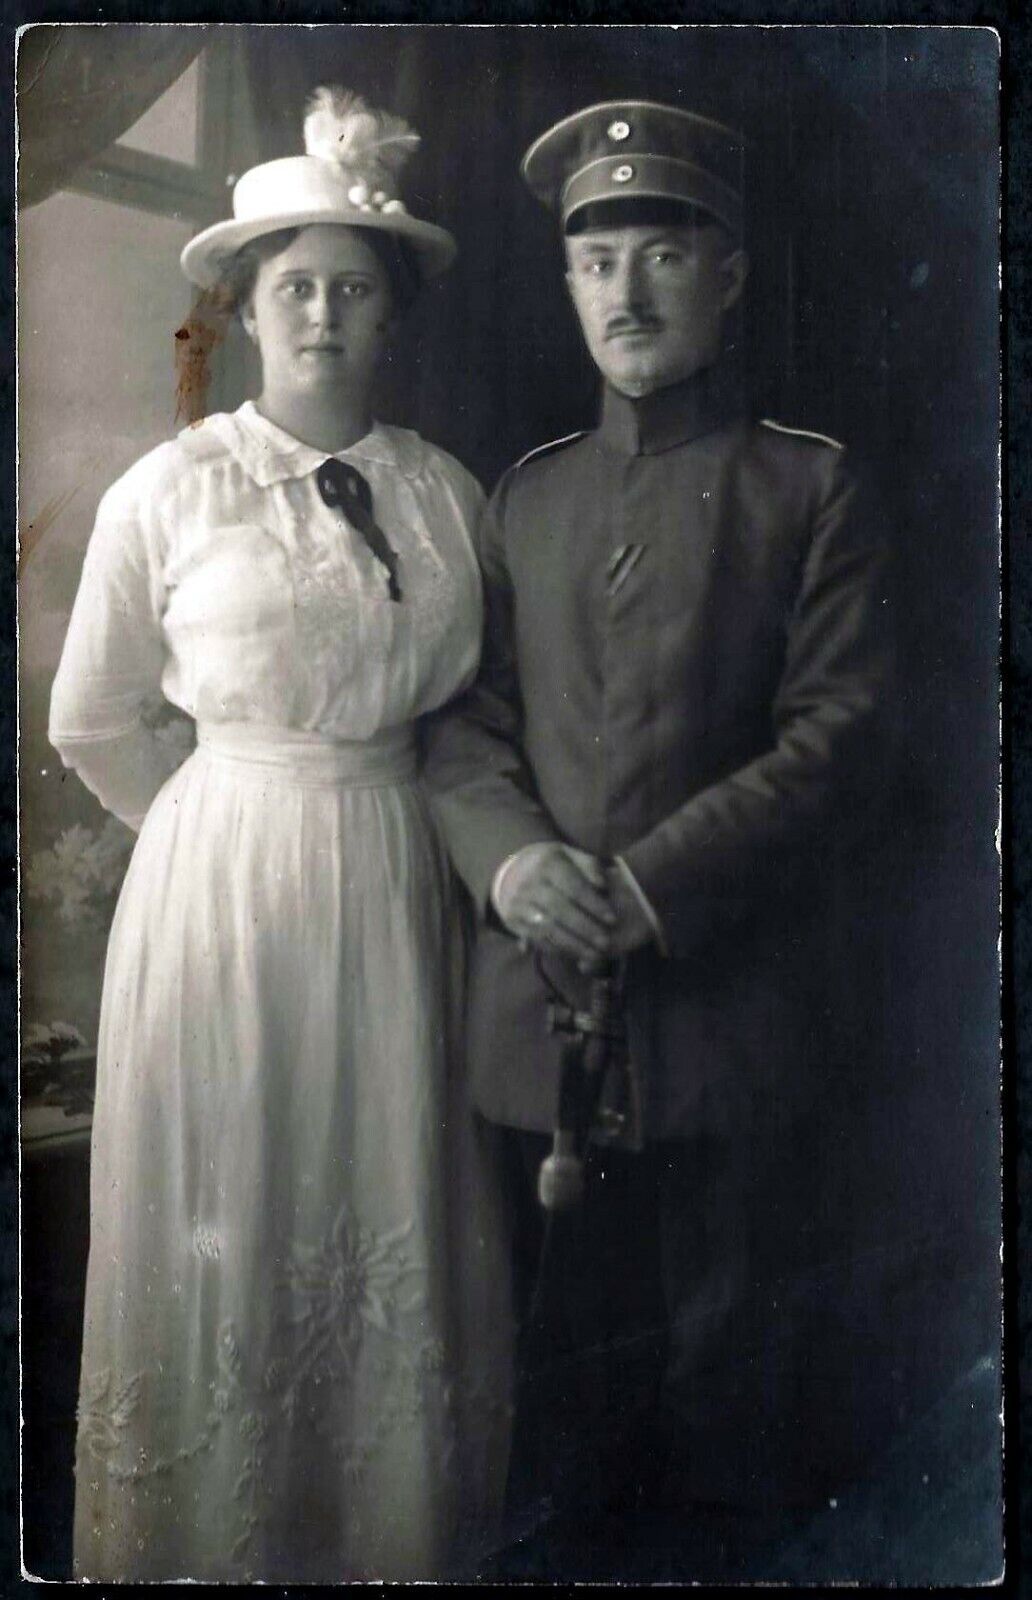 WW1-GERMAN SOLDIER WITH HIS WIFE